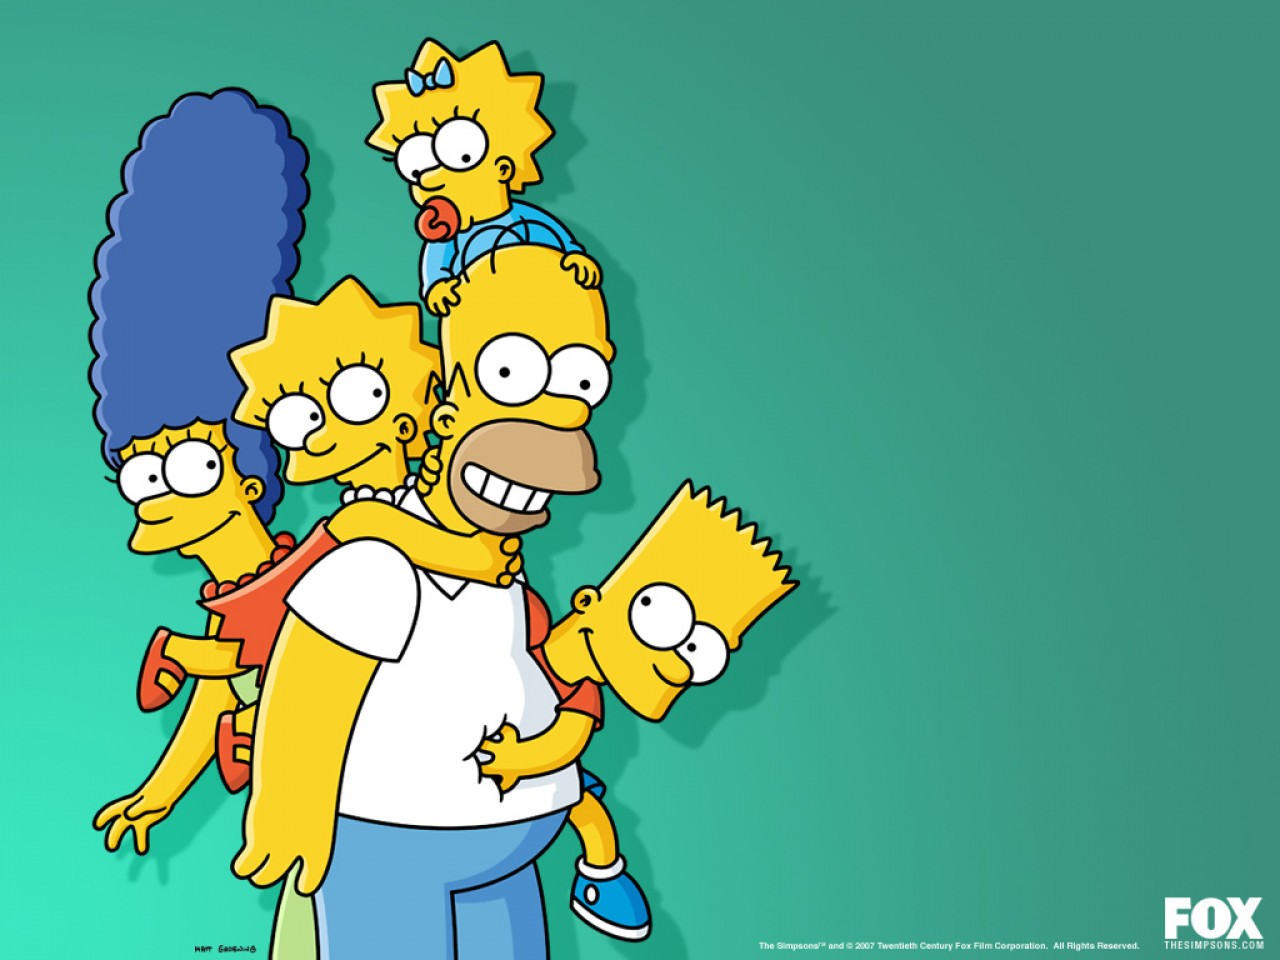 the simpsons, tv show, bart simpson, homer simpson, lisa simpson, maggie simpson, marge simpson